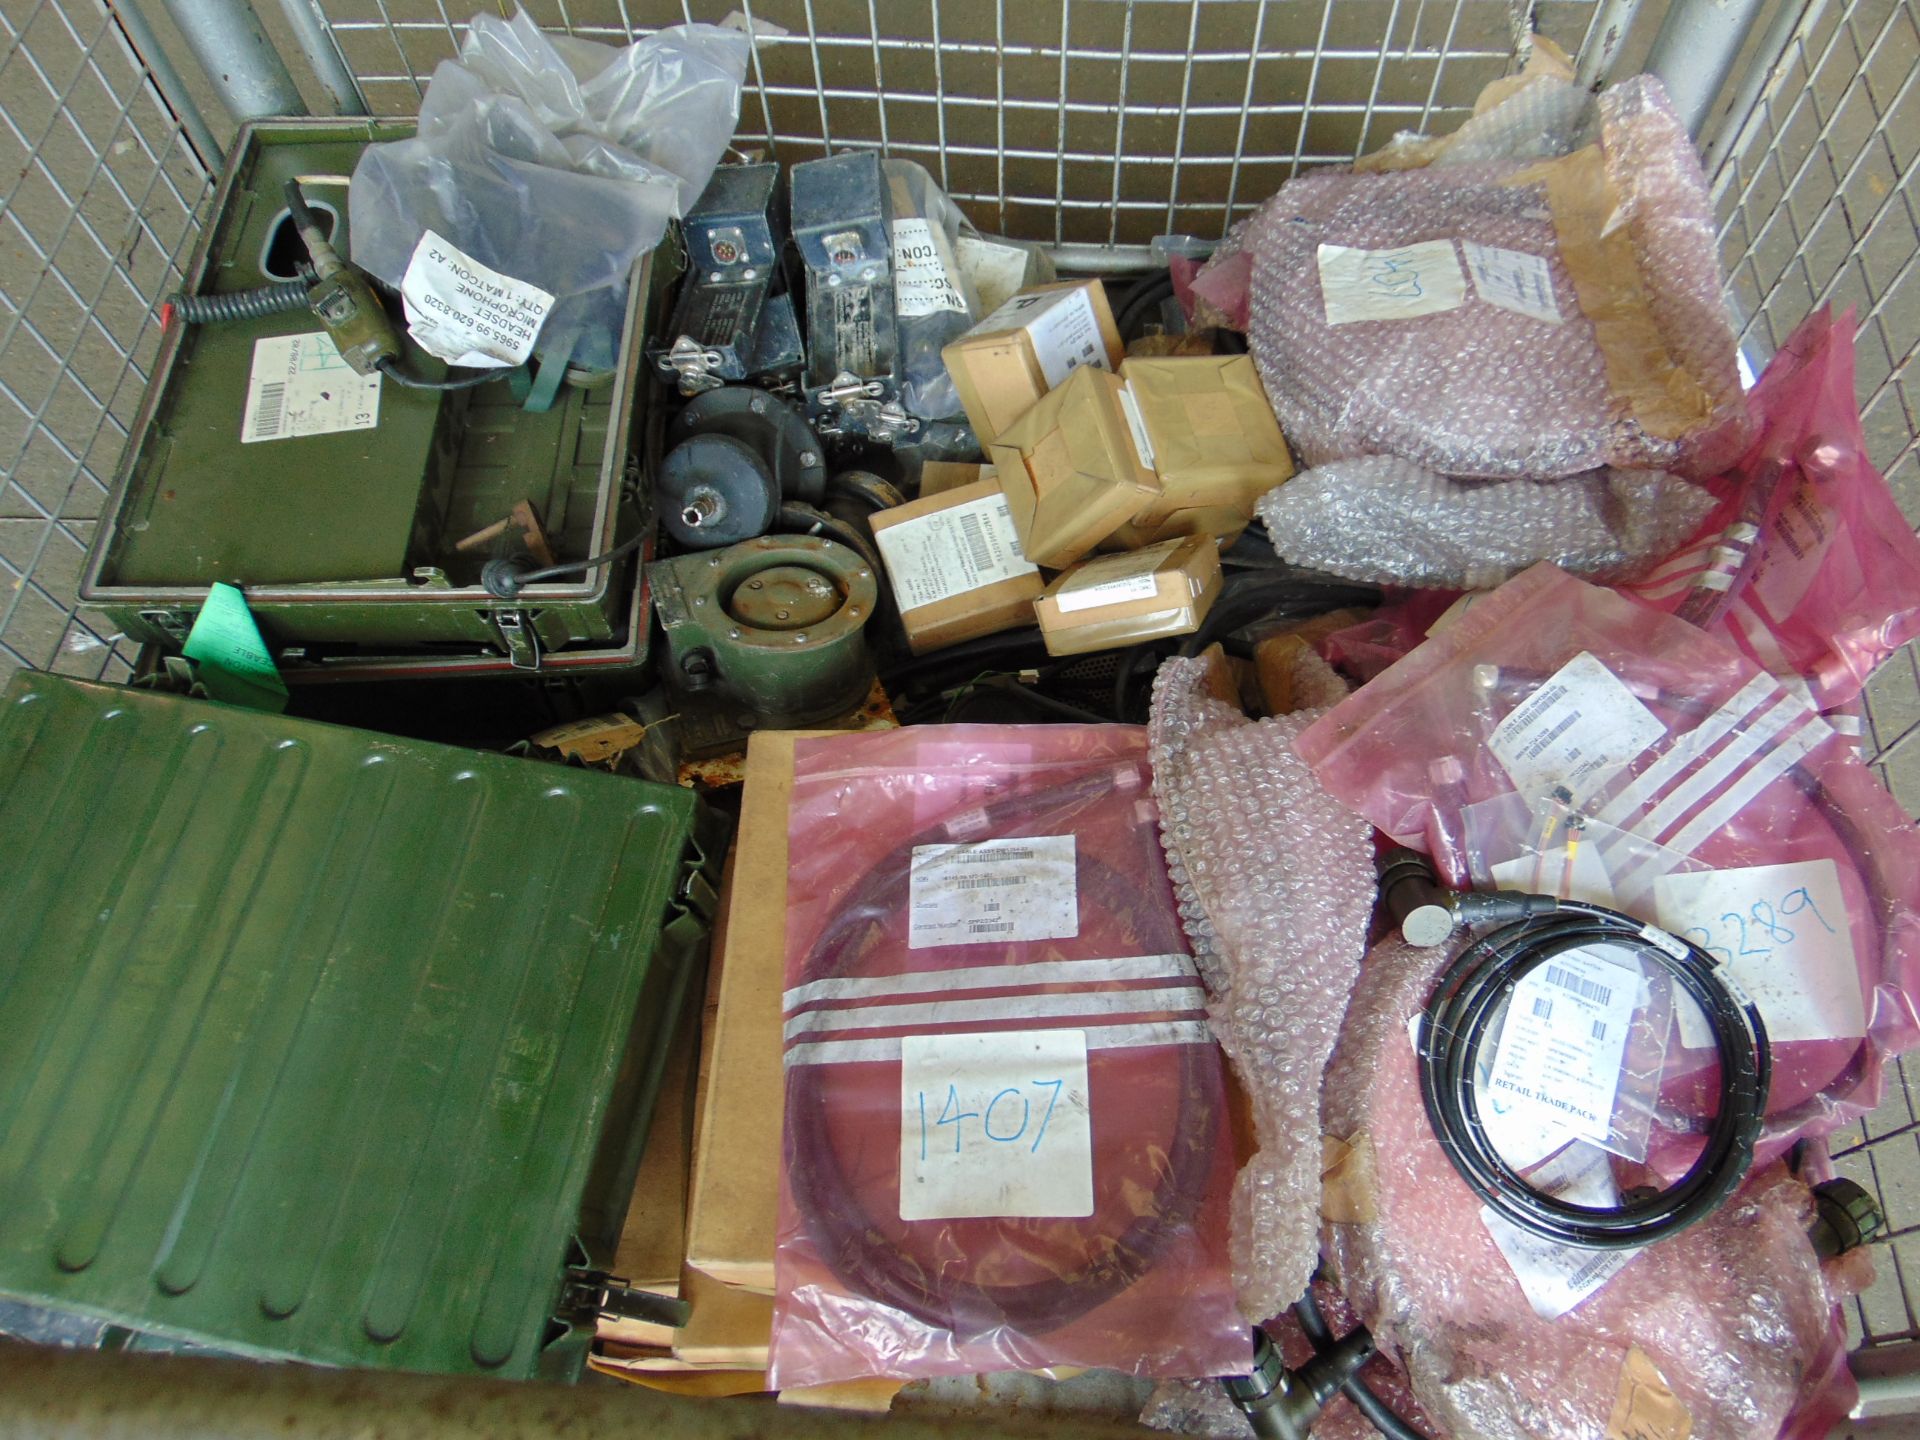 1x Stillage of Clansman Radio Equipment in Cables, Bases, Spares Etc - Image 4 of 6